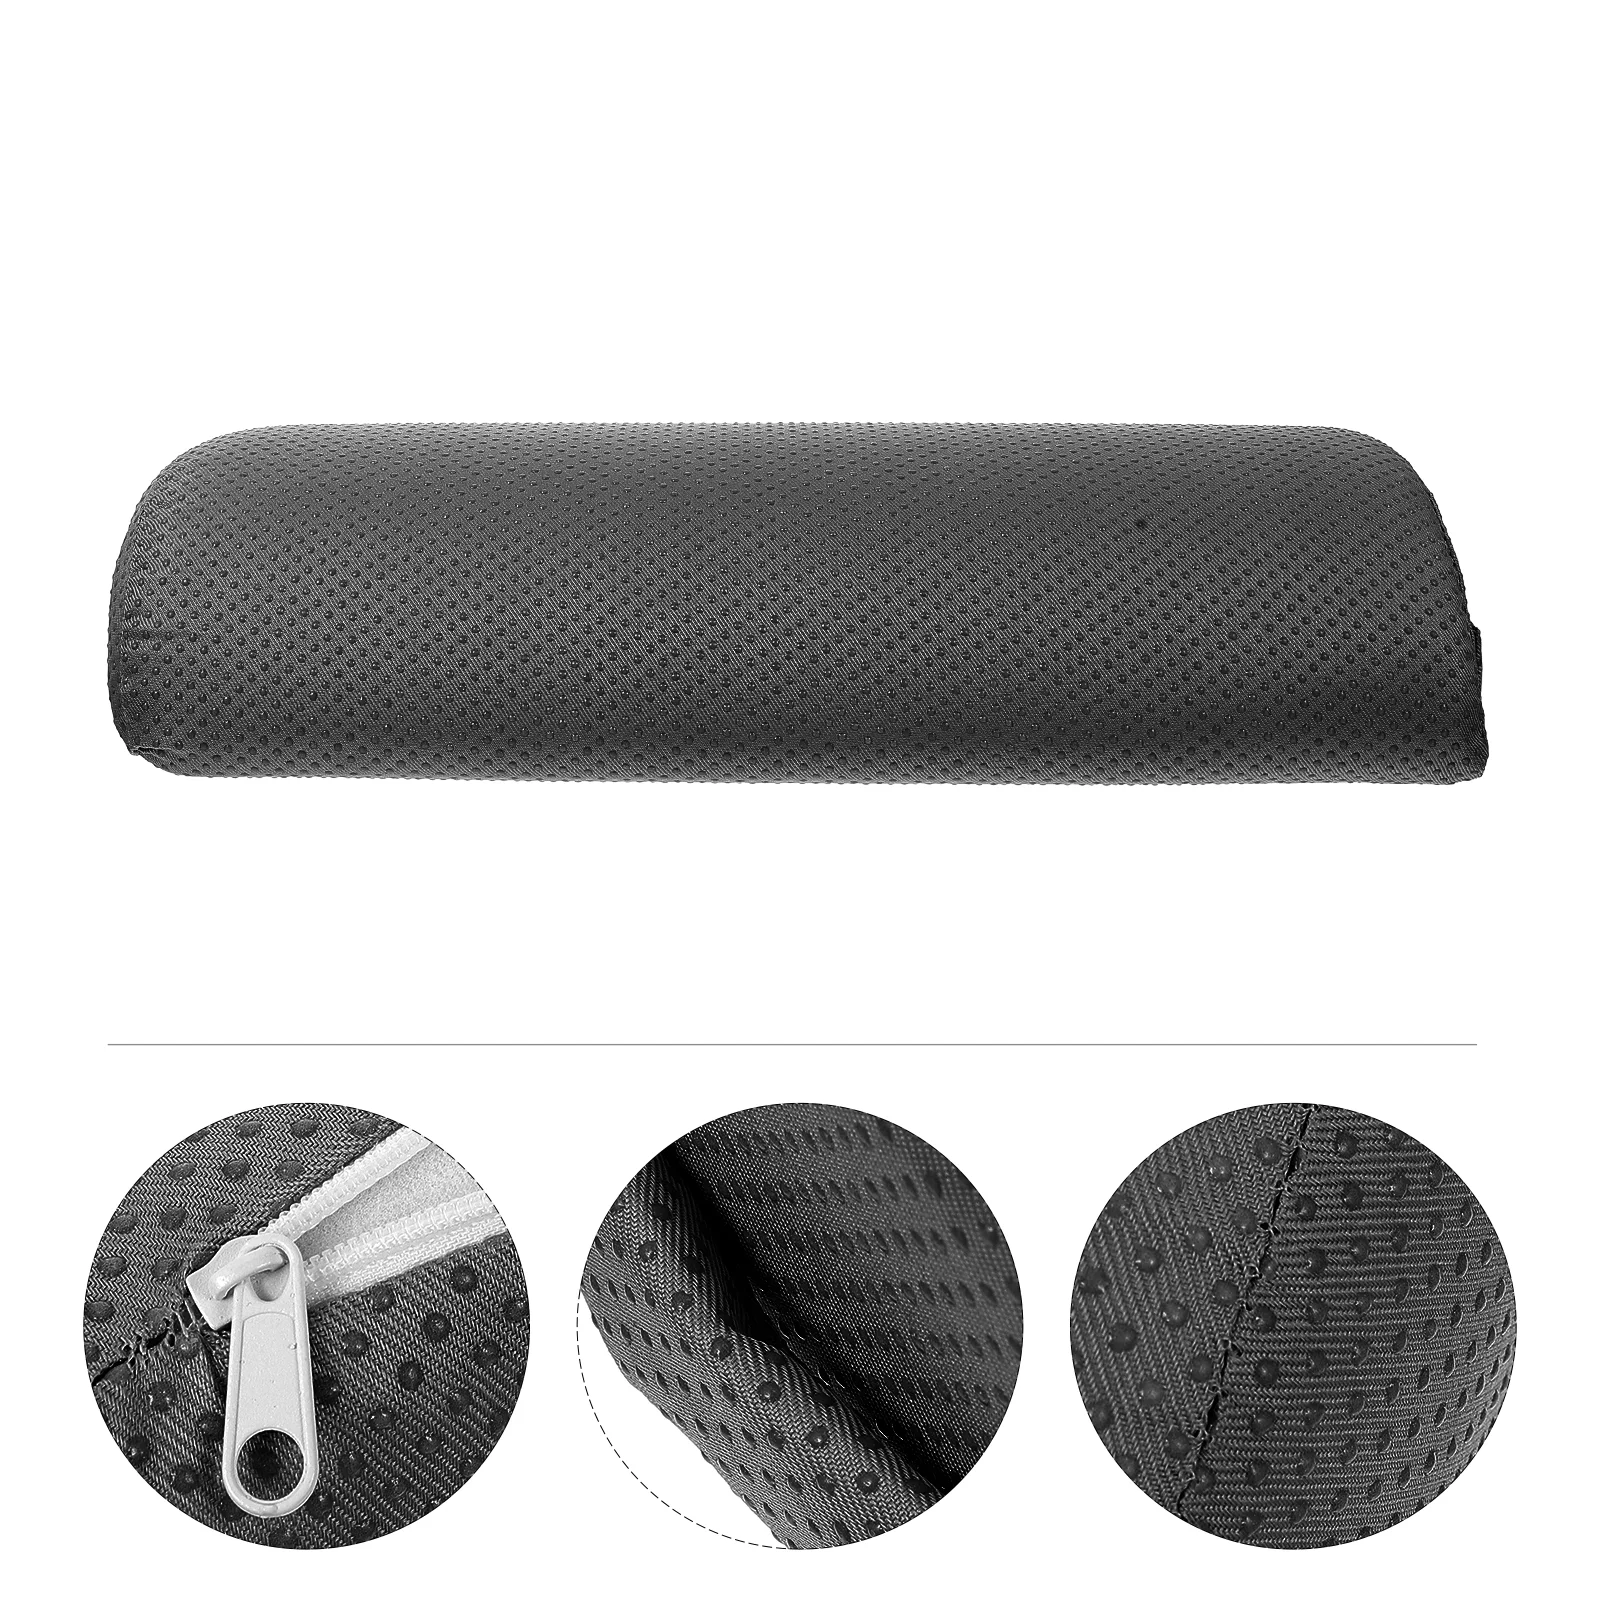 

Office Rest Mat Ankle Pillow Cushion for Foot Footrest Pads Sponges Protector Semi-cylindrical Polyester Cotton Holding Work